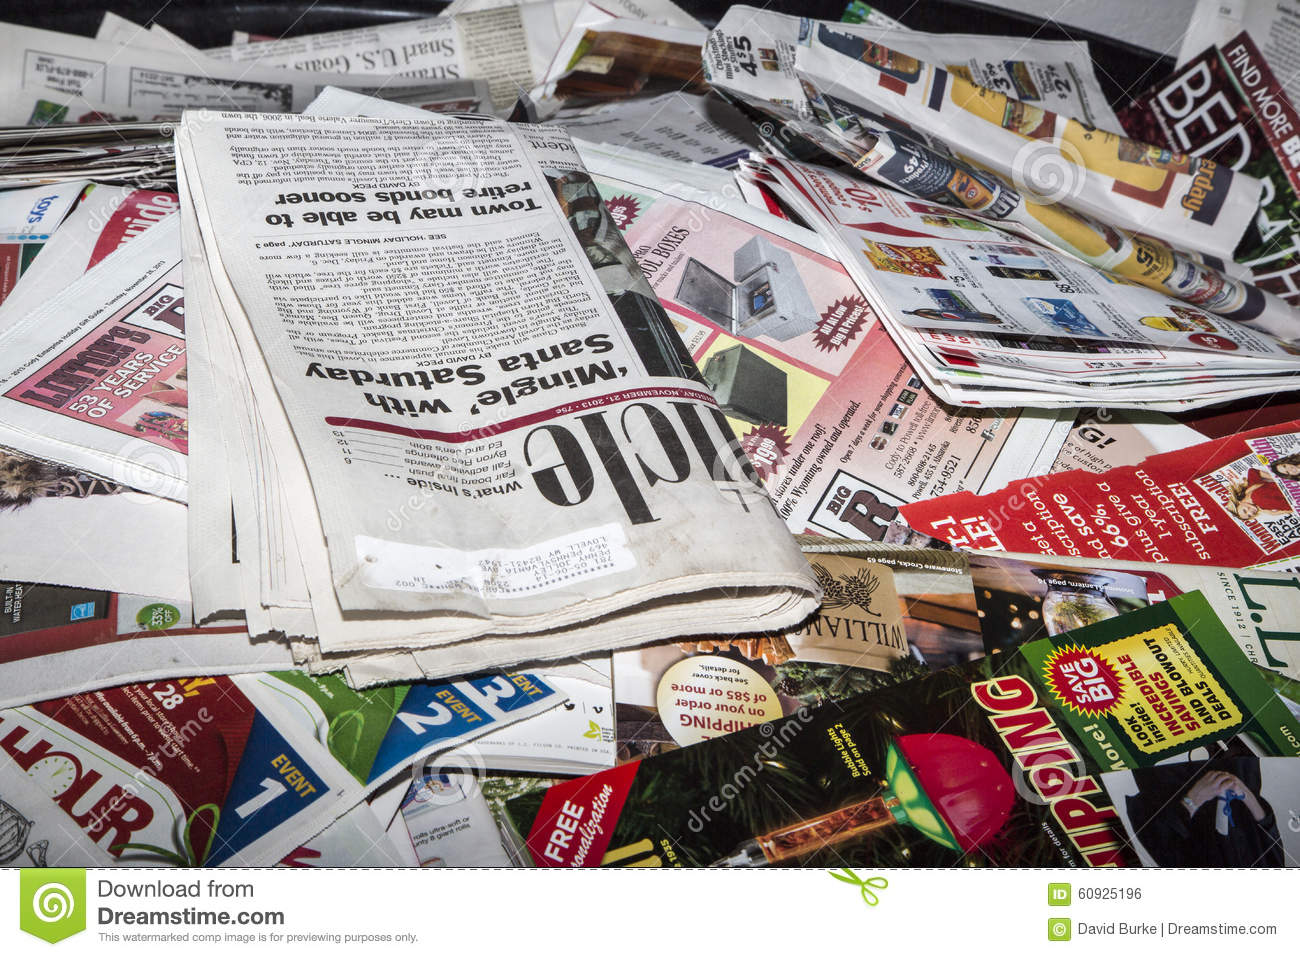 The Newpaper Newsprint And Magazines Are Collected To Recycle 